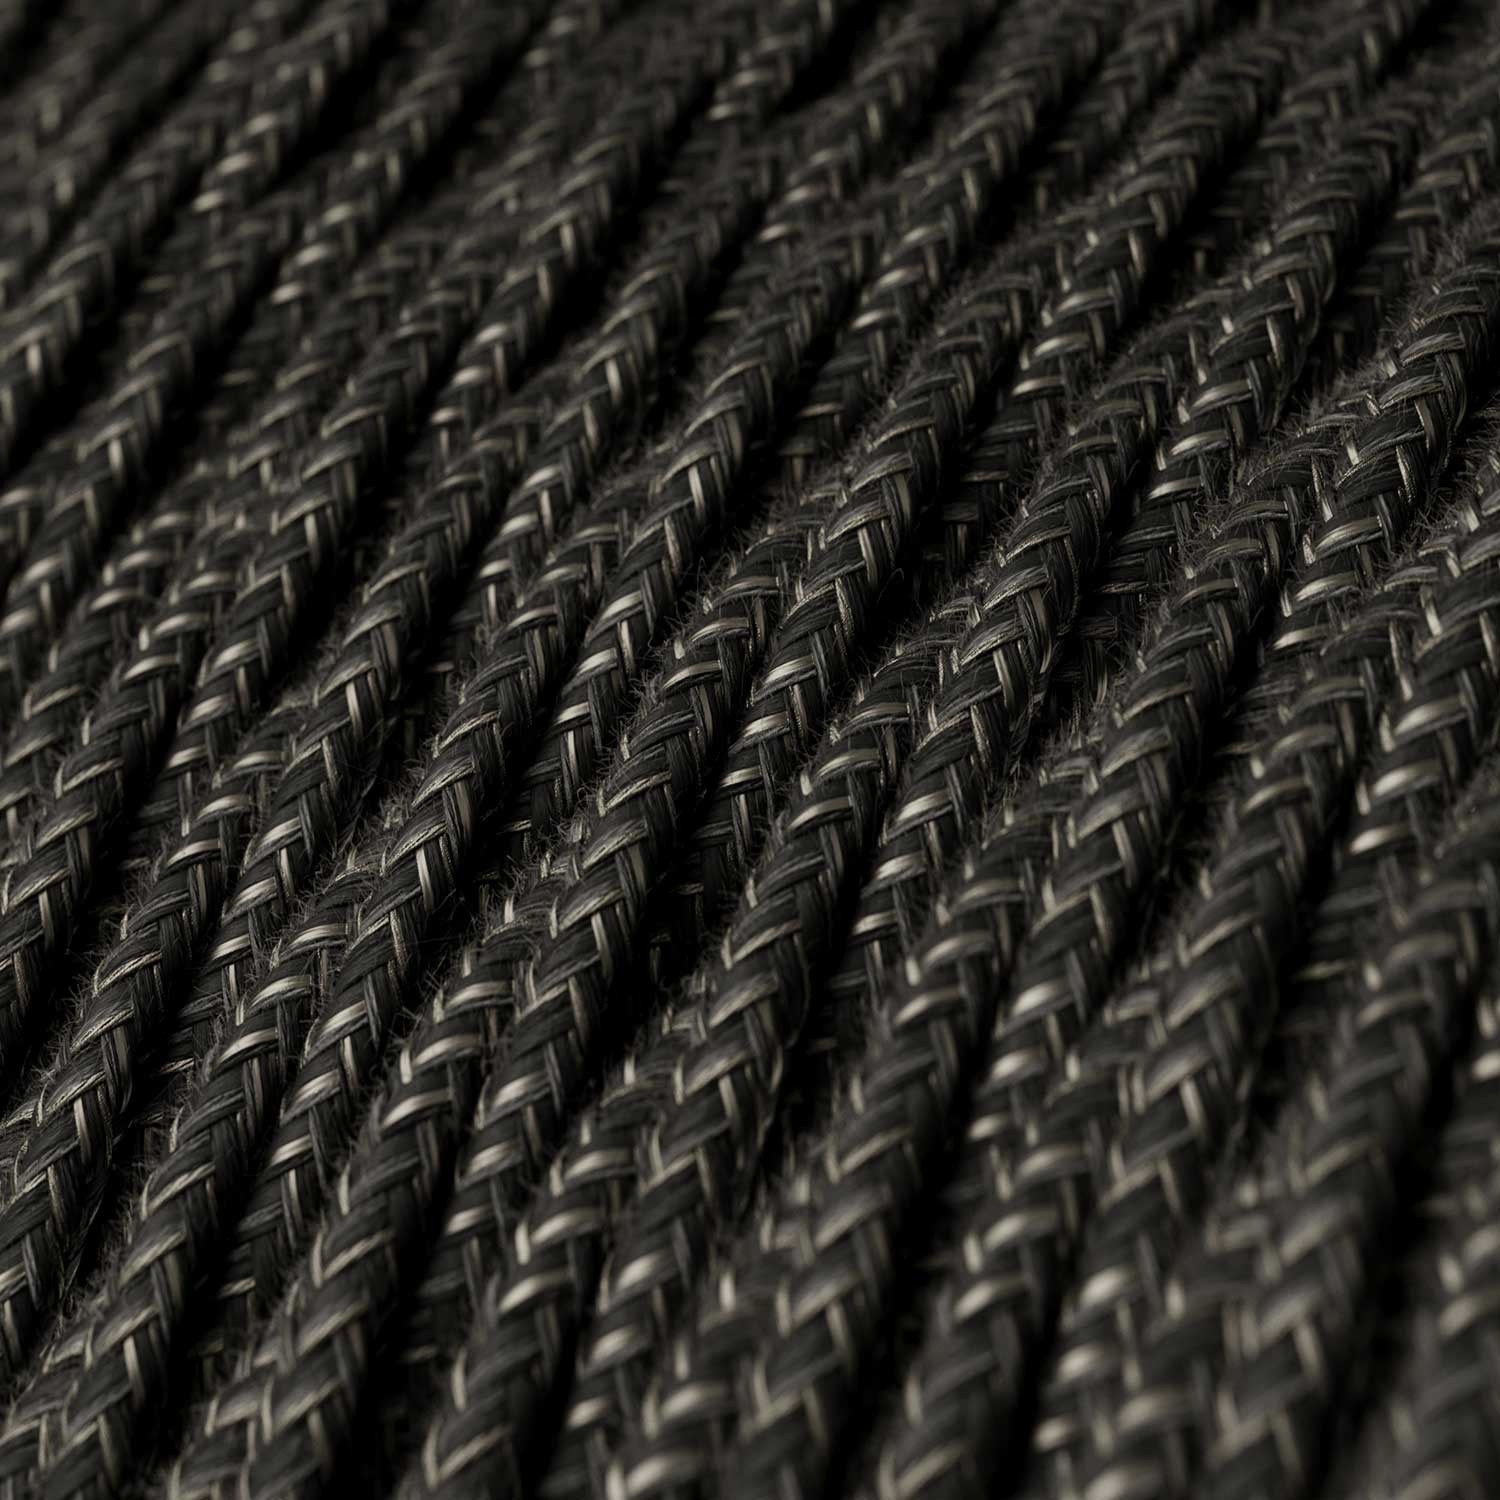 Charcoal Linen covered Twisted electric cable 2x18 AWG - TN03